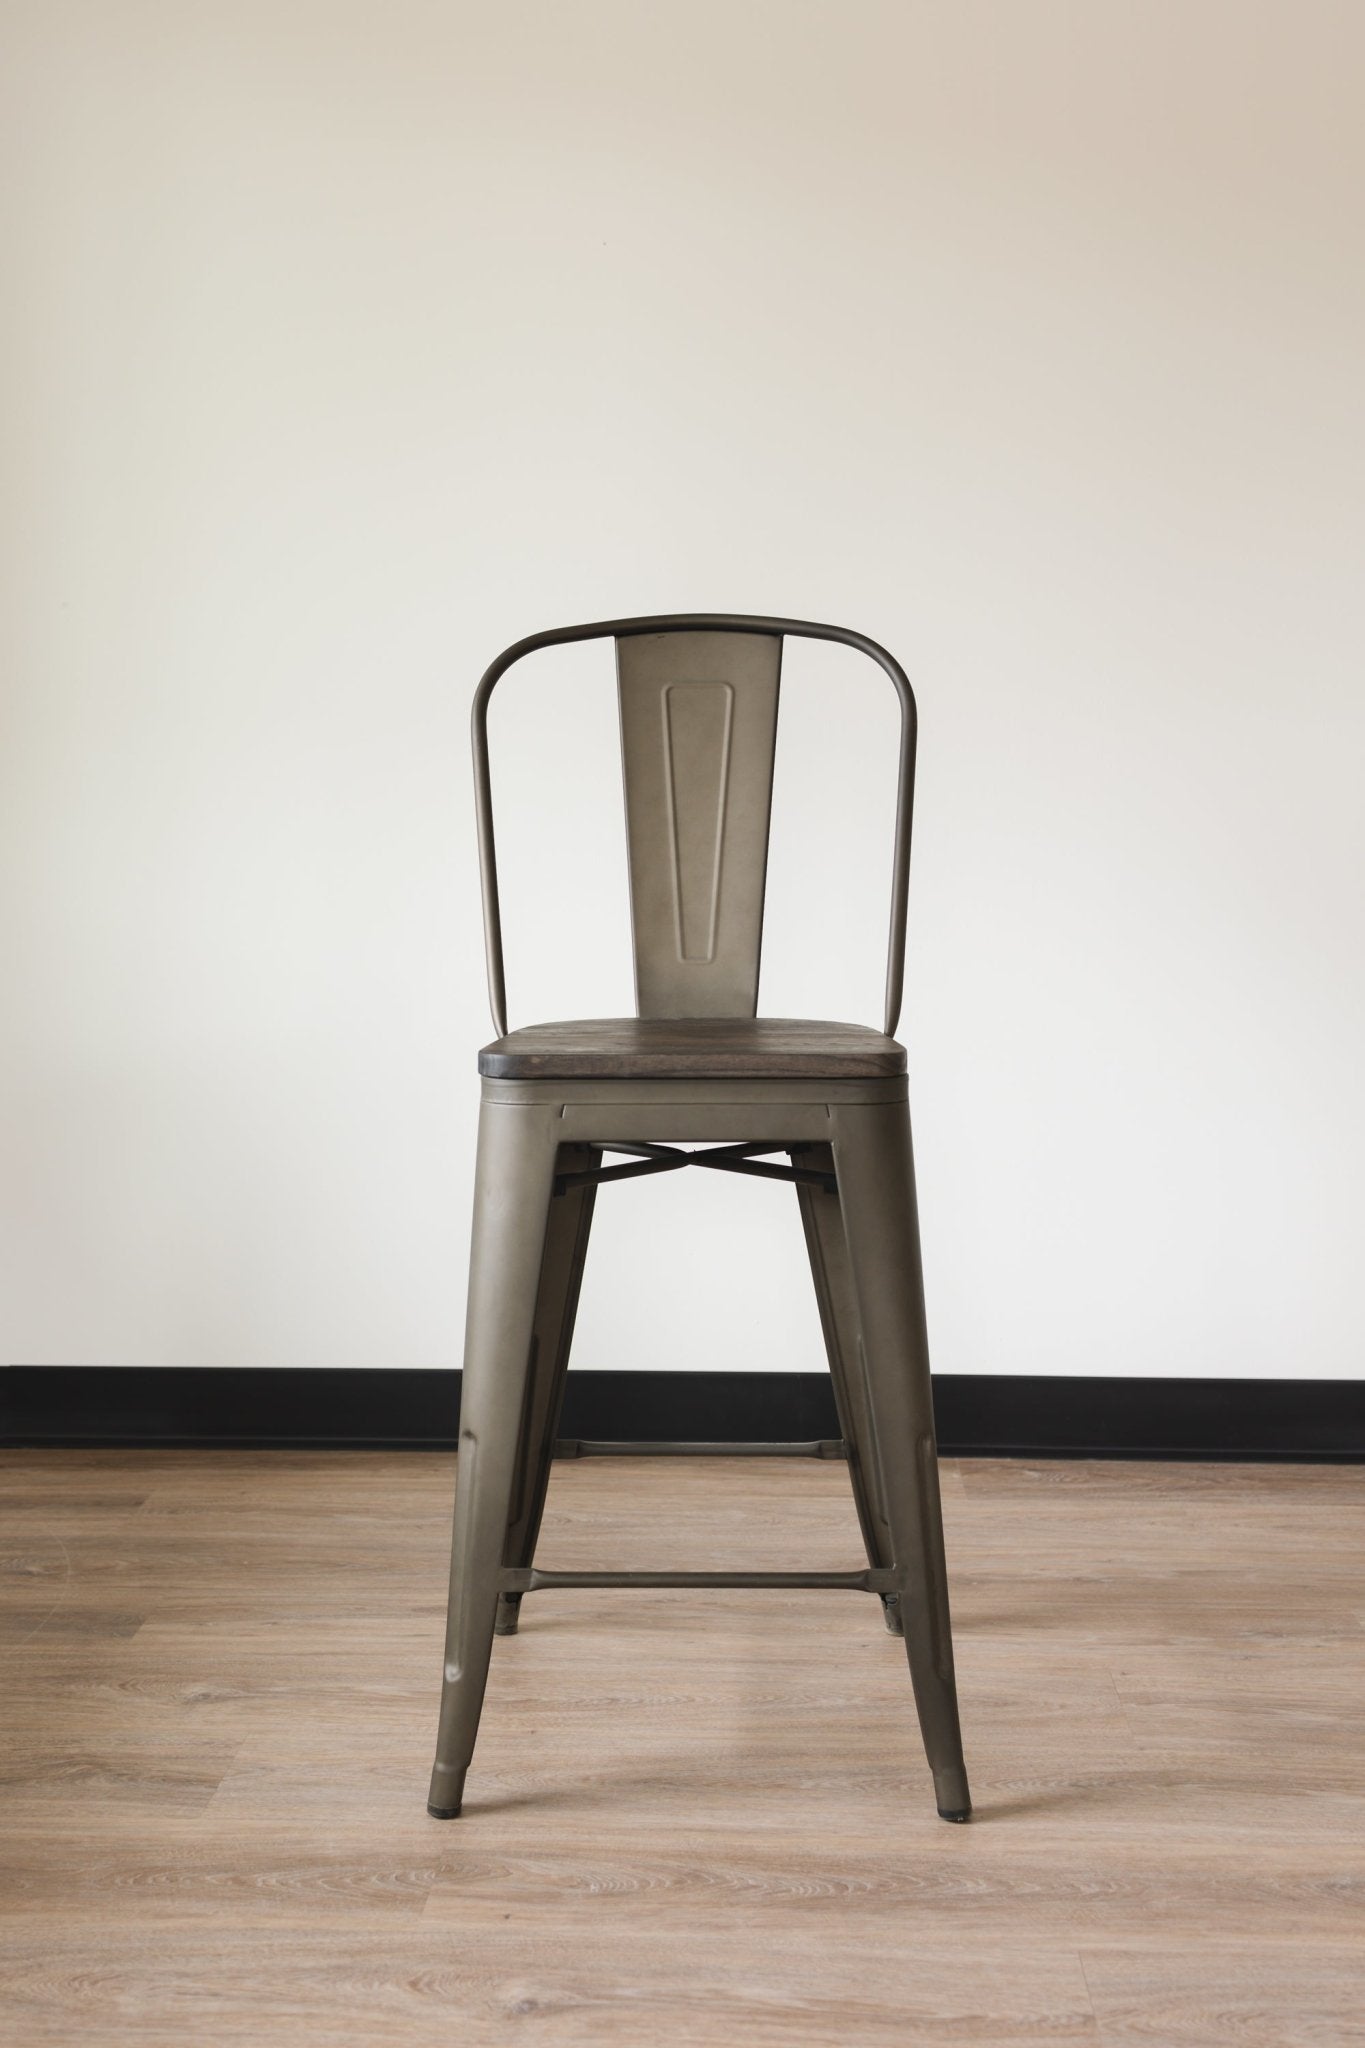 The Industrial Bar Chair - FargoWoodworks